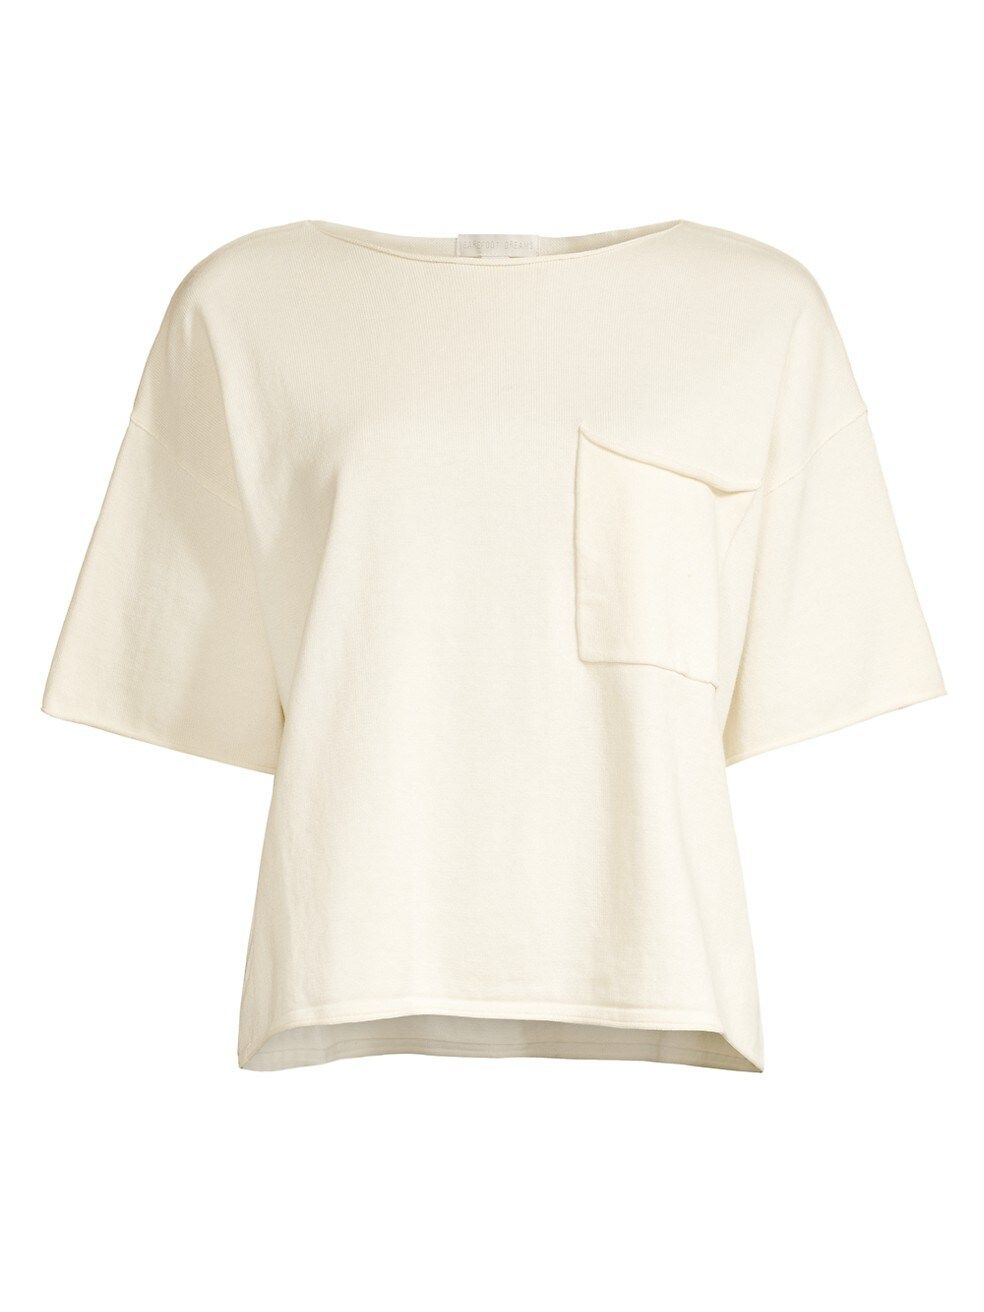 Barefoot Dreams Essentials Sunbleached Cotton Boxy Tee | Saks Fifth Avenue